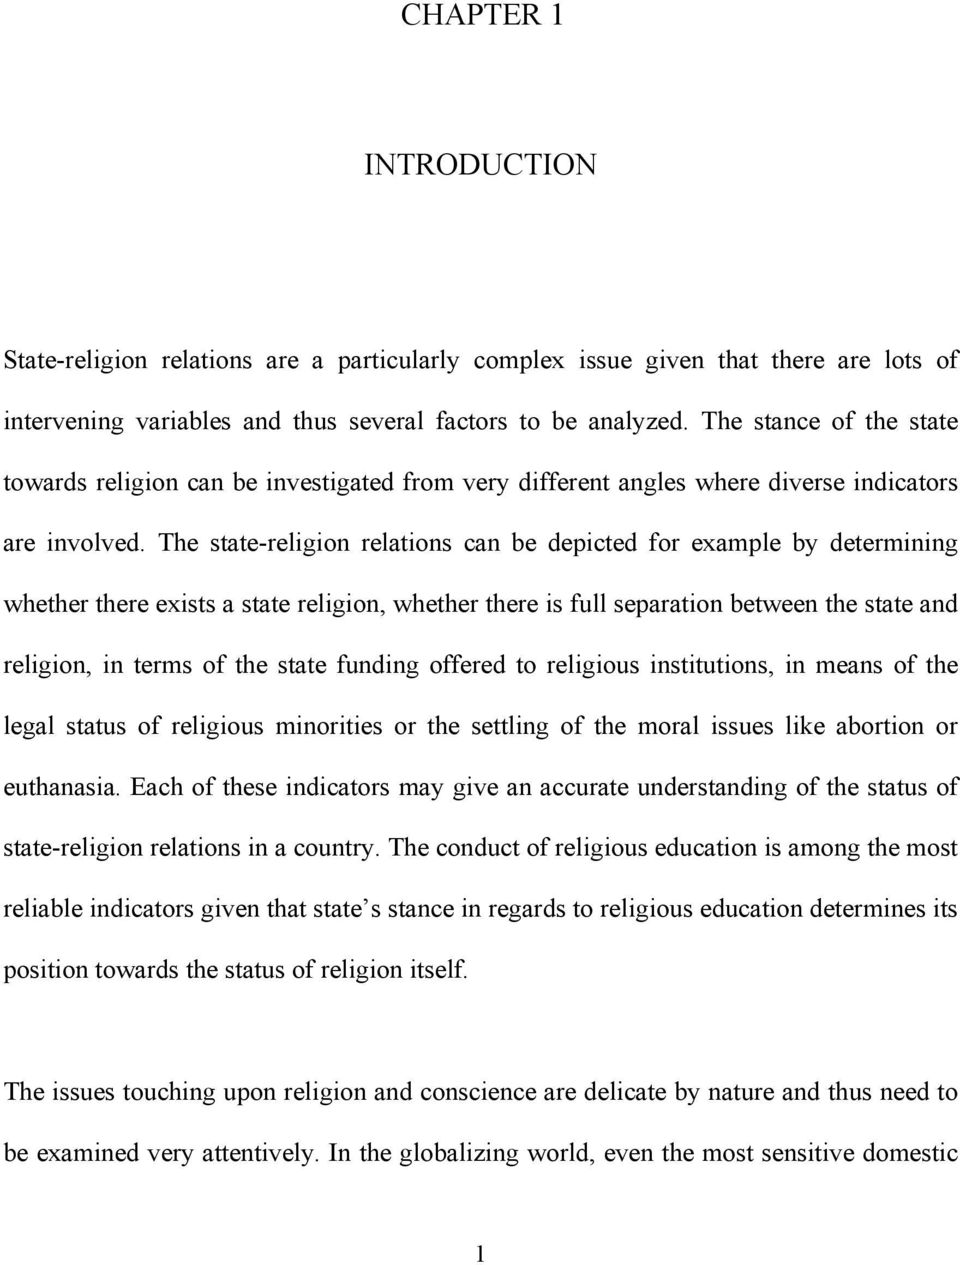 The state-religion relations can be depicted for example by determining whether there exists a state religion, whether there is full separation between the state and religion, in terms of the state